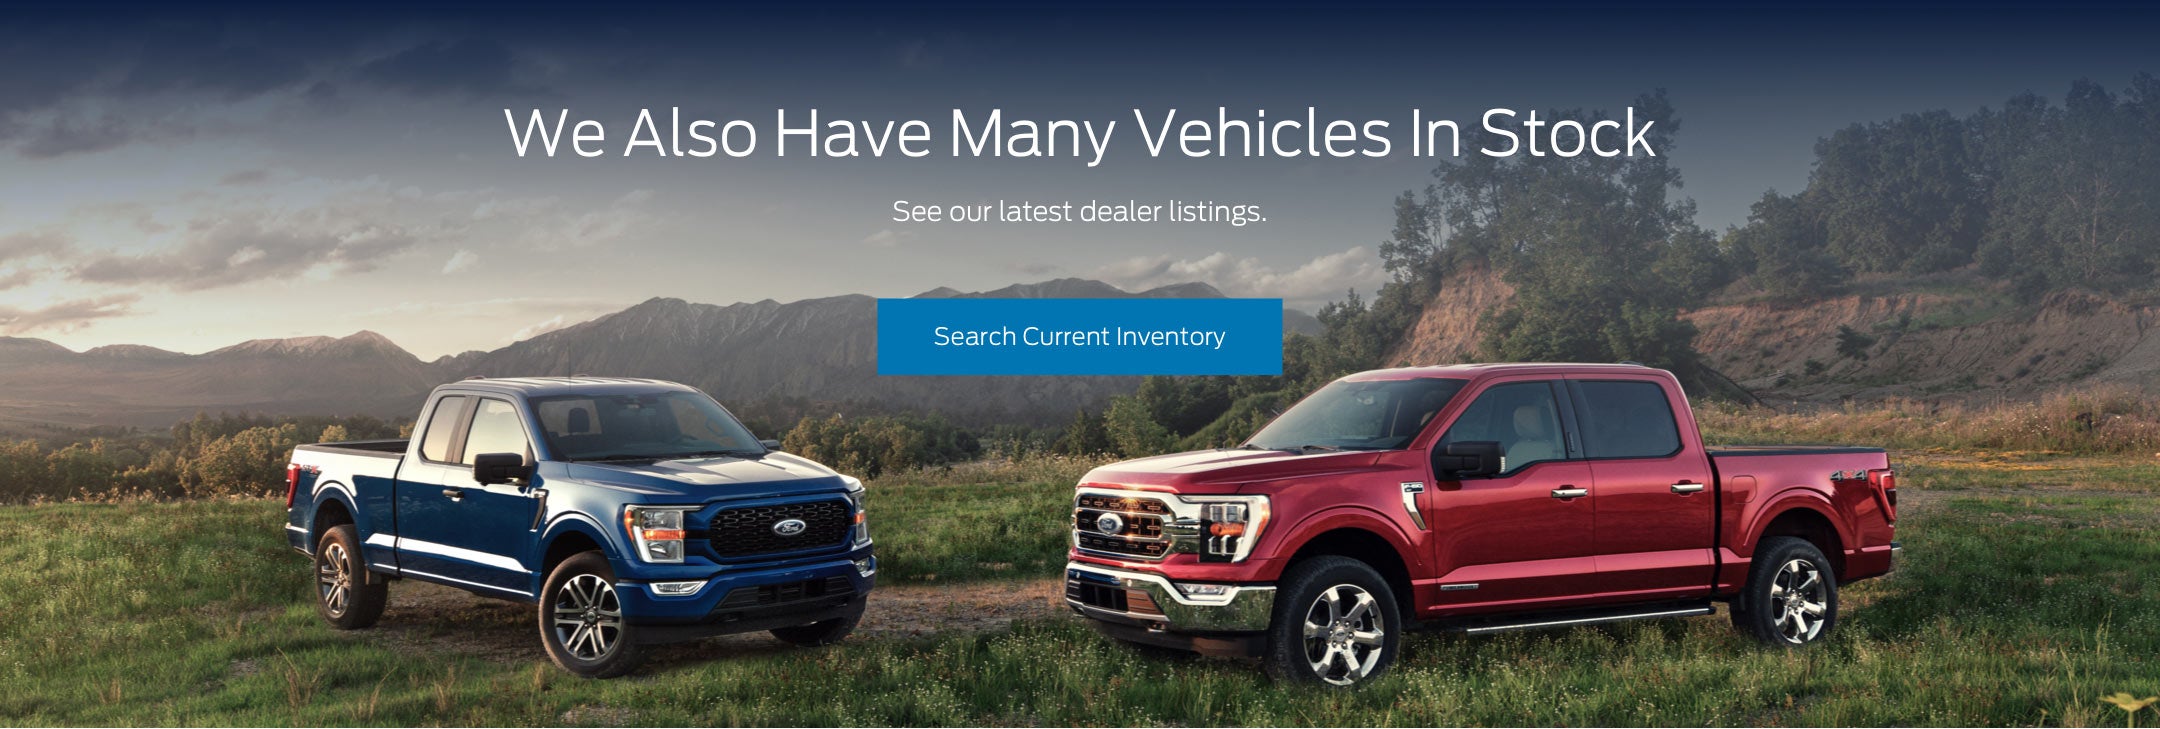 Ford vehicles in stock | Bayou Ford in La Place LA